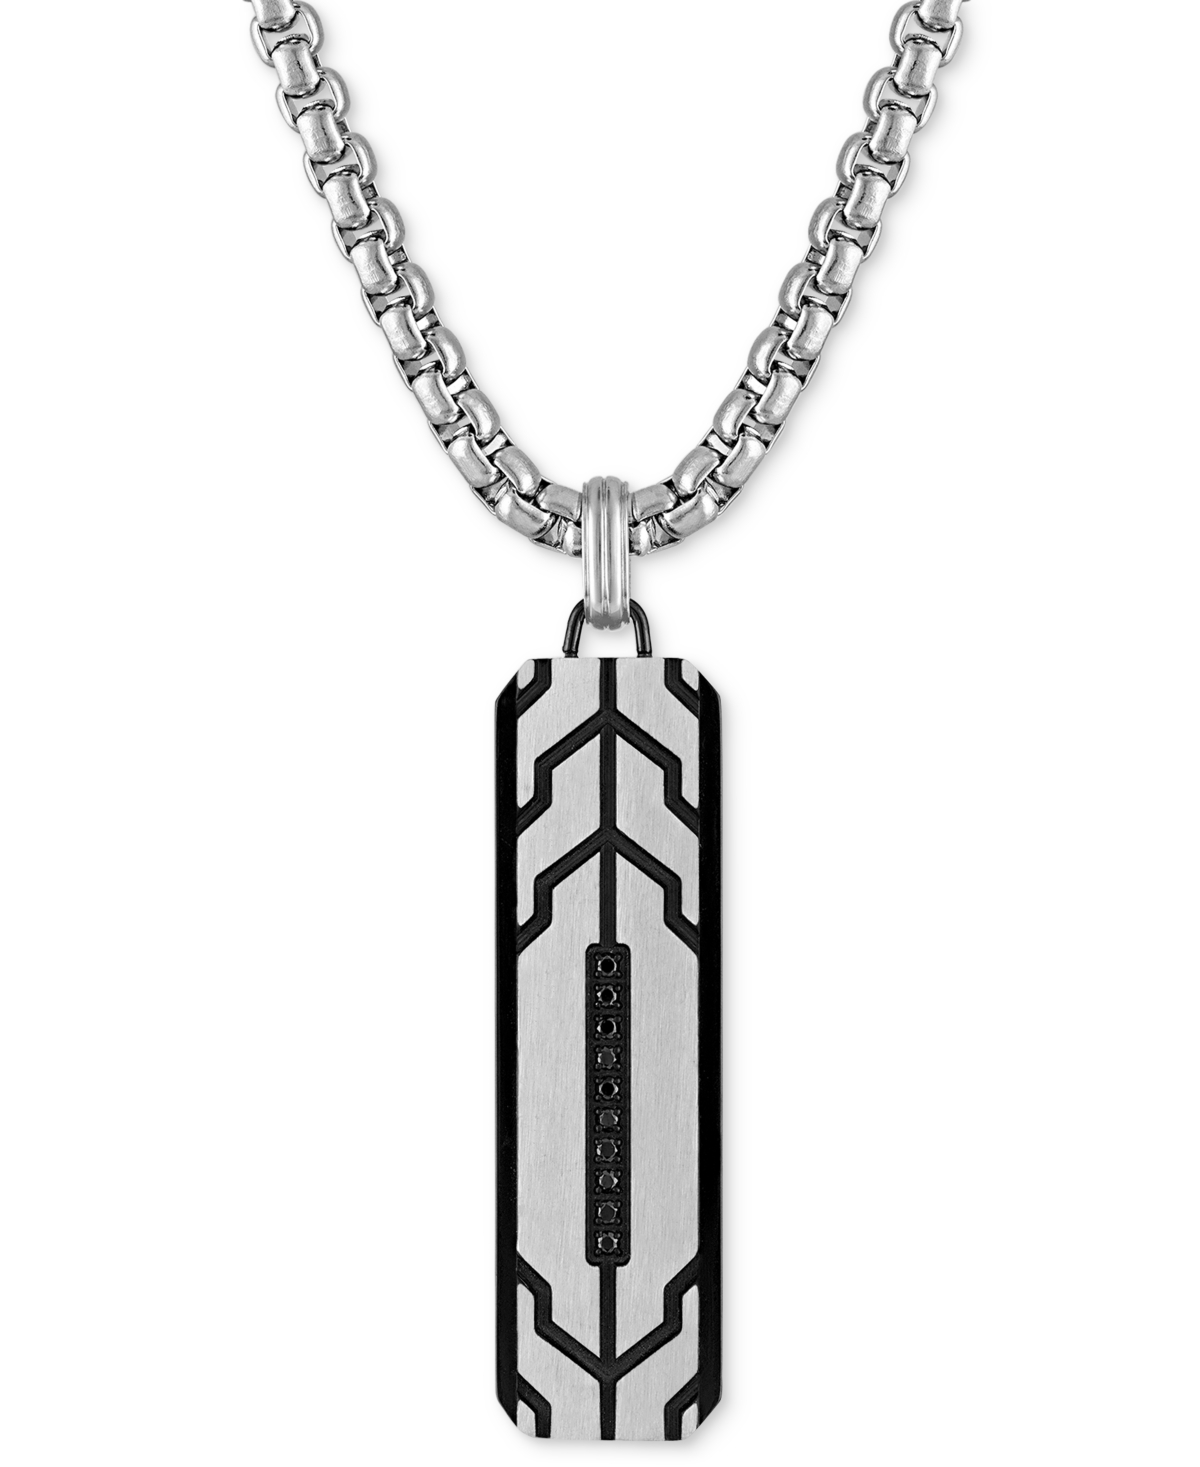 Esquire Men's Jewelry Black Diamond Dog Tag 22" Pendant Necklace In Stainless Steel & Black Ion-plate, Created For Macy's